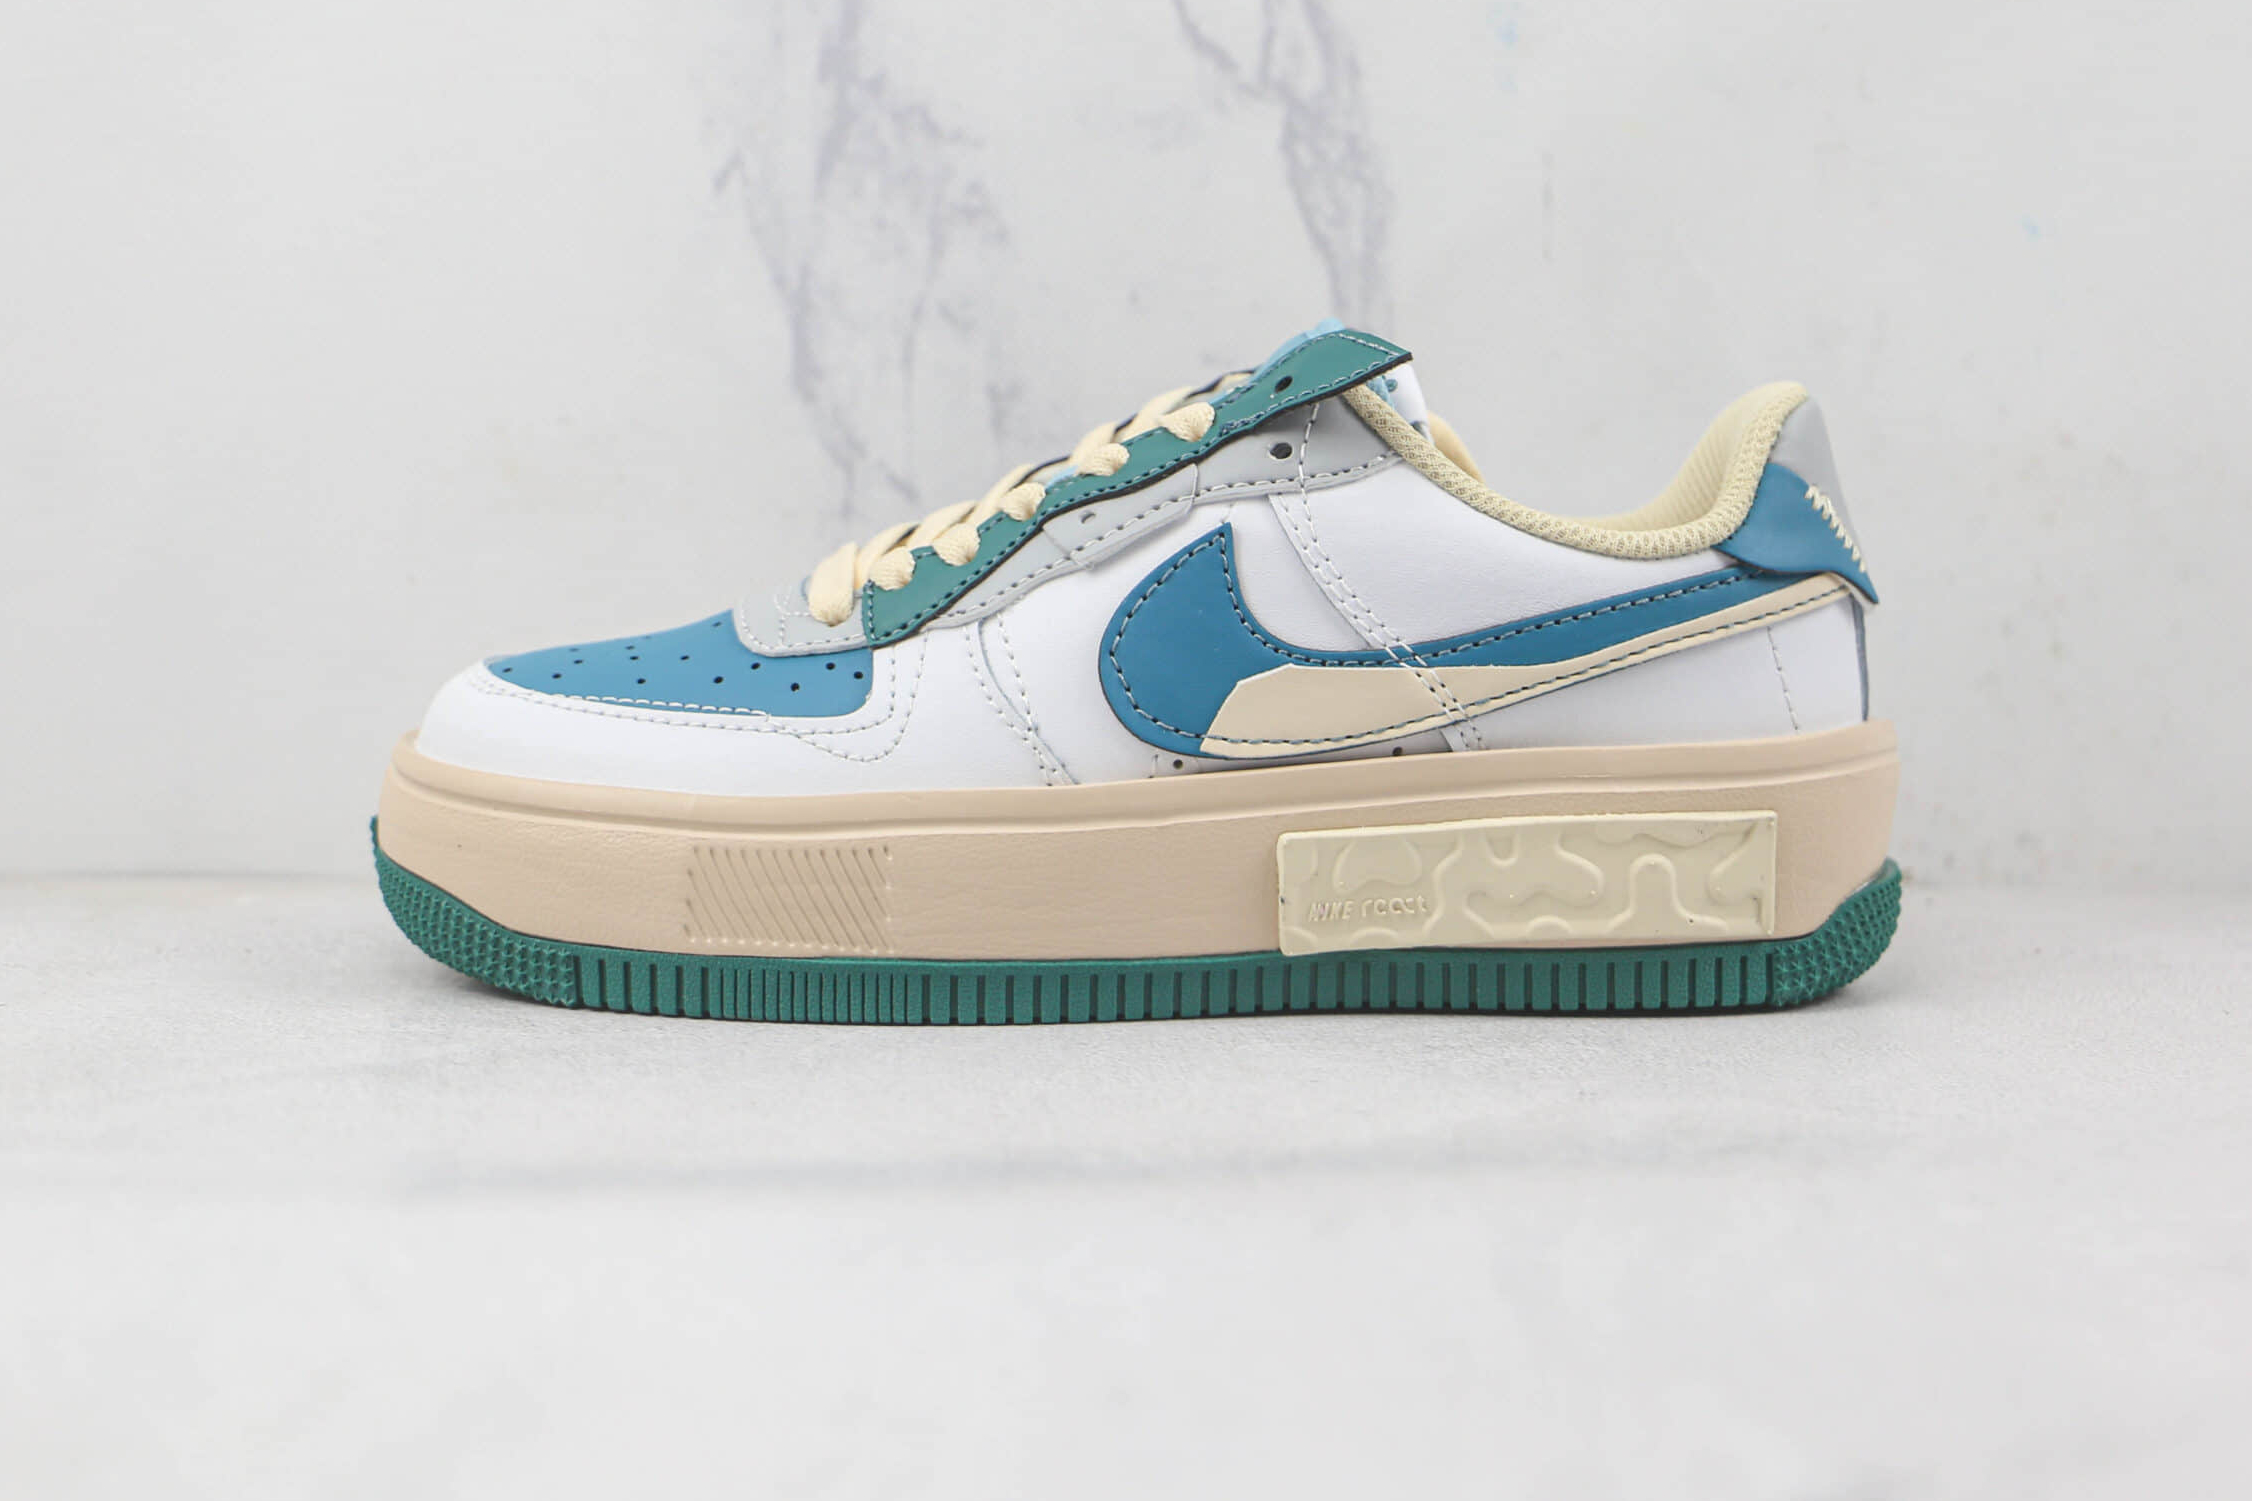 Nike Air Force 1 Fontanka Navy Blue Green Grey CW6688-604 - Stylish and Functional Sneakers for Men